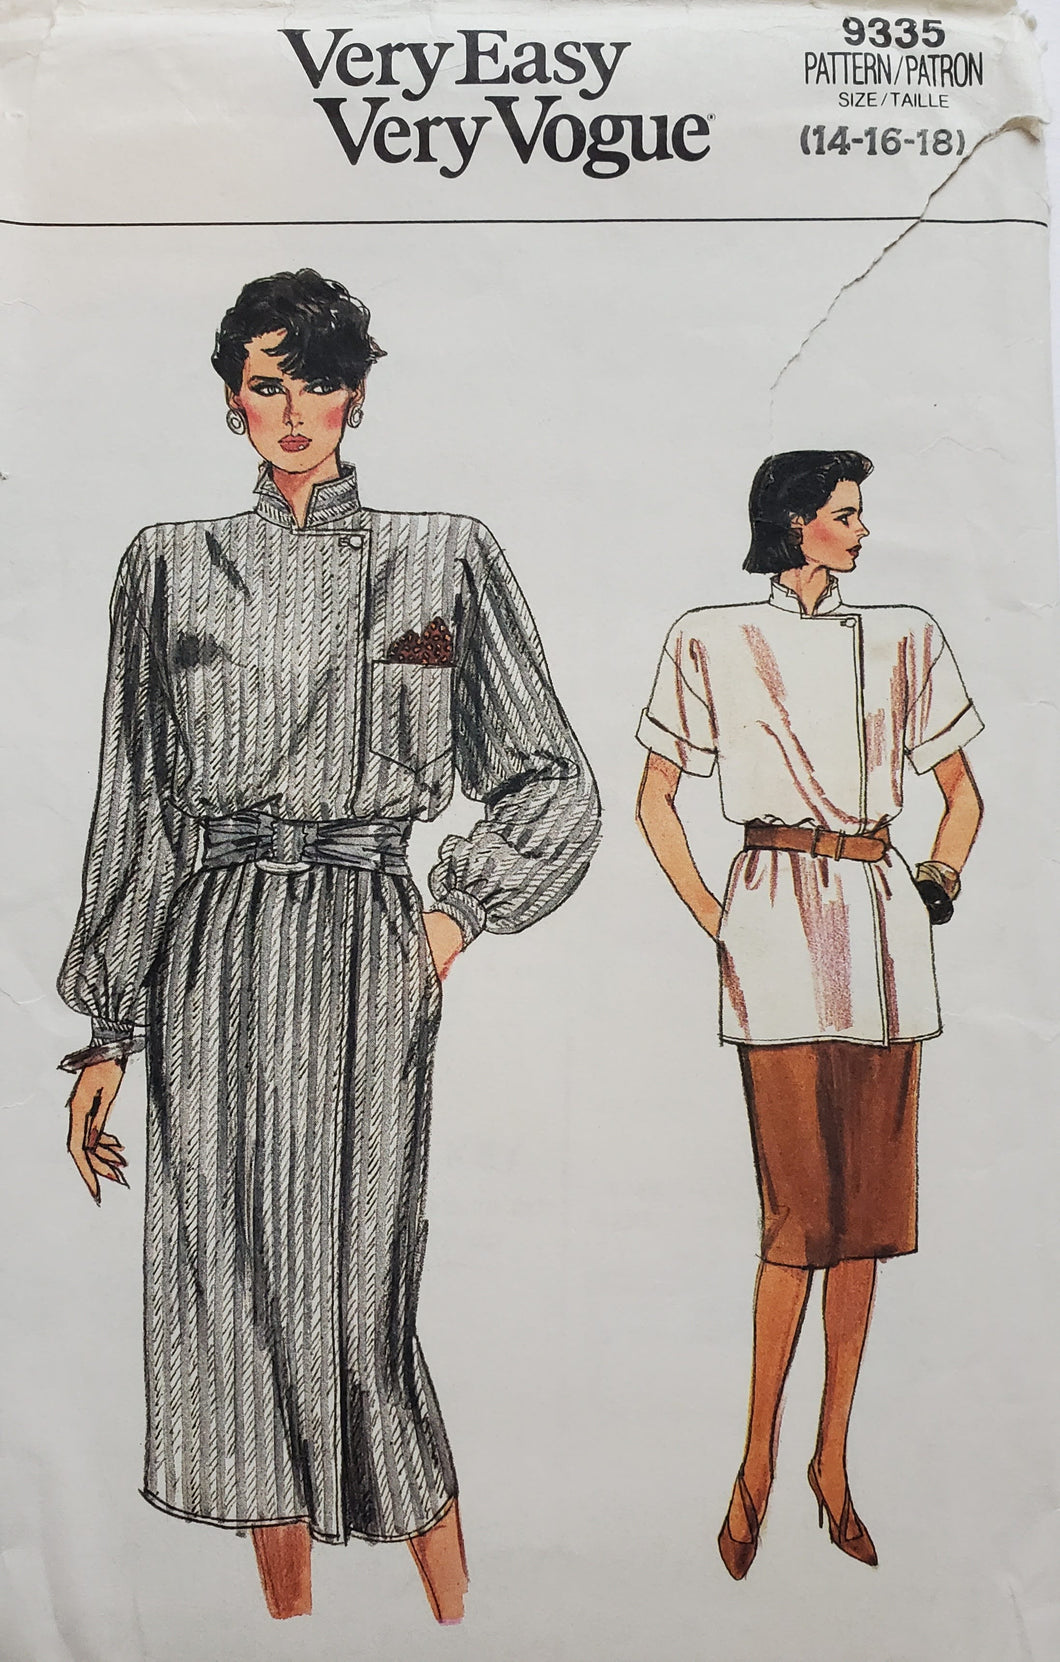 Vogue Pattern 9335, UNCUT and UNUSED Misses Wrap Dress, Skirt and Top Size 14-16-18